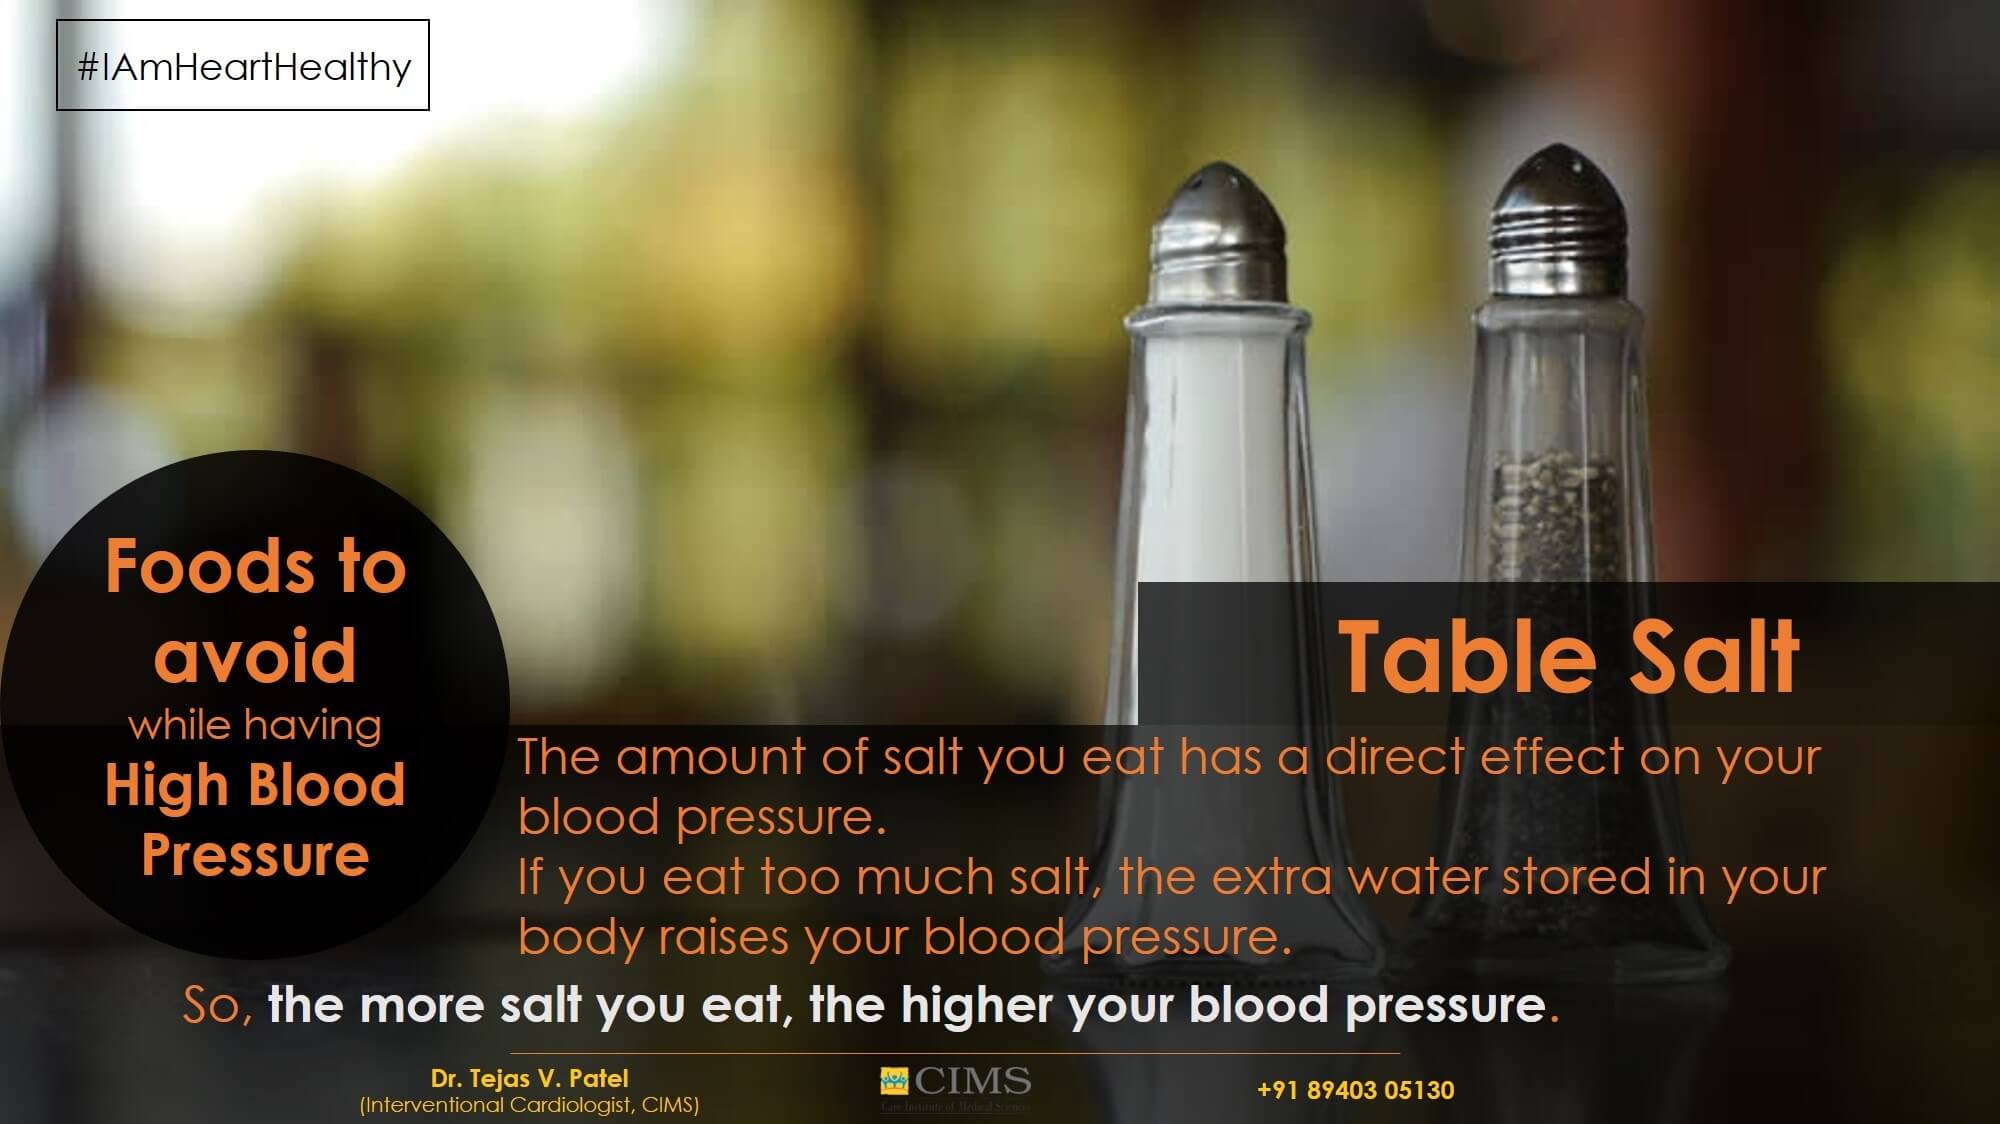 Foods to avoid while having High Blood Pressure